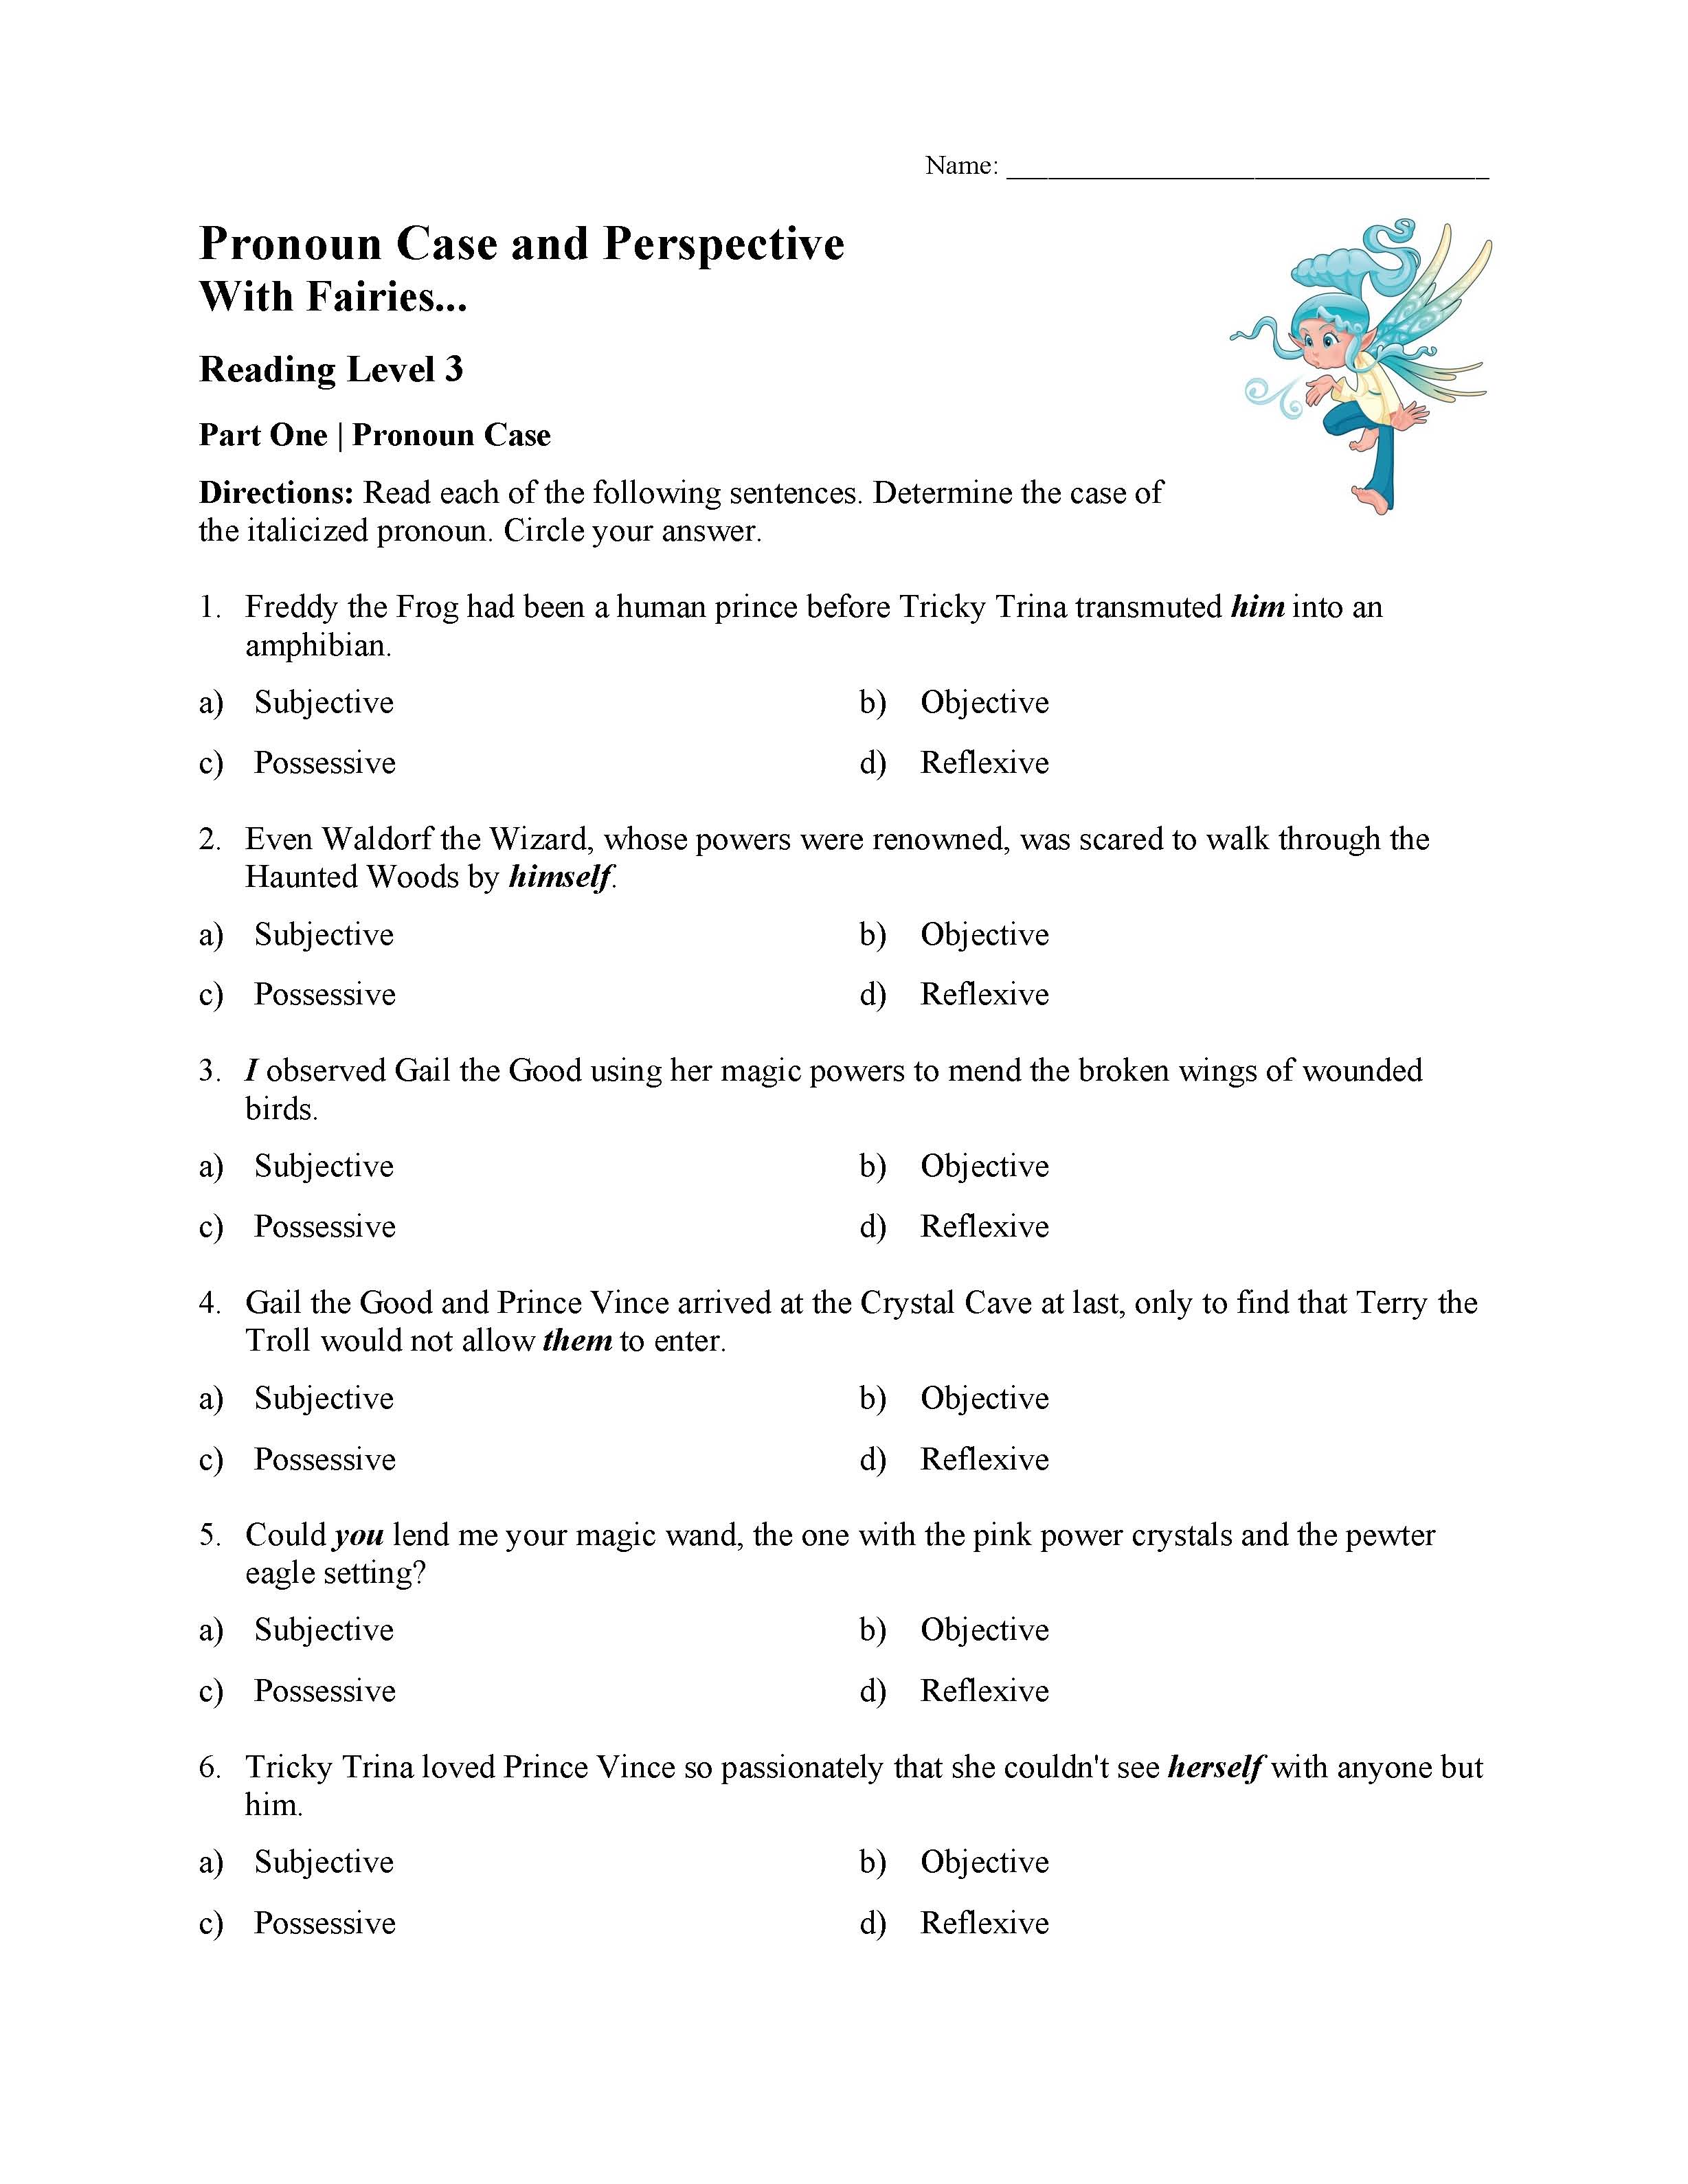 This is a preview image of the Pronoun Case and Perspective Test - With Fairies | Reading Level 3.